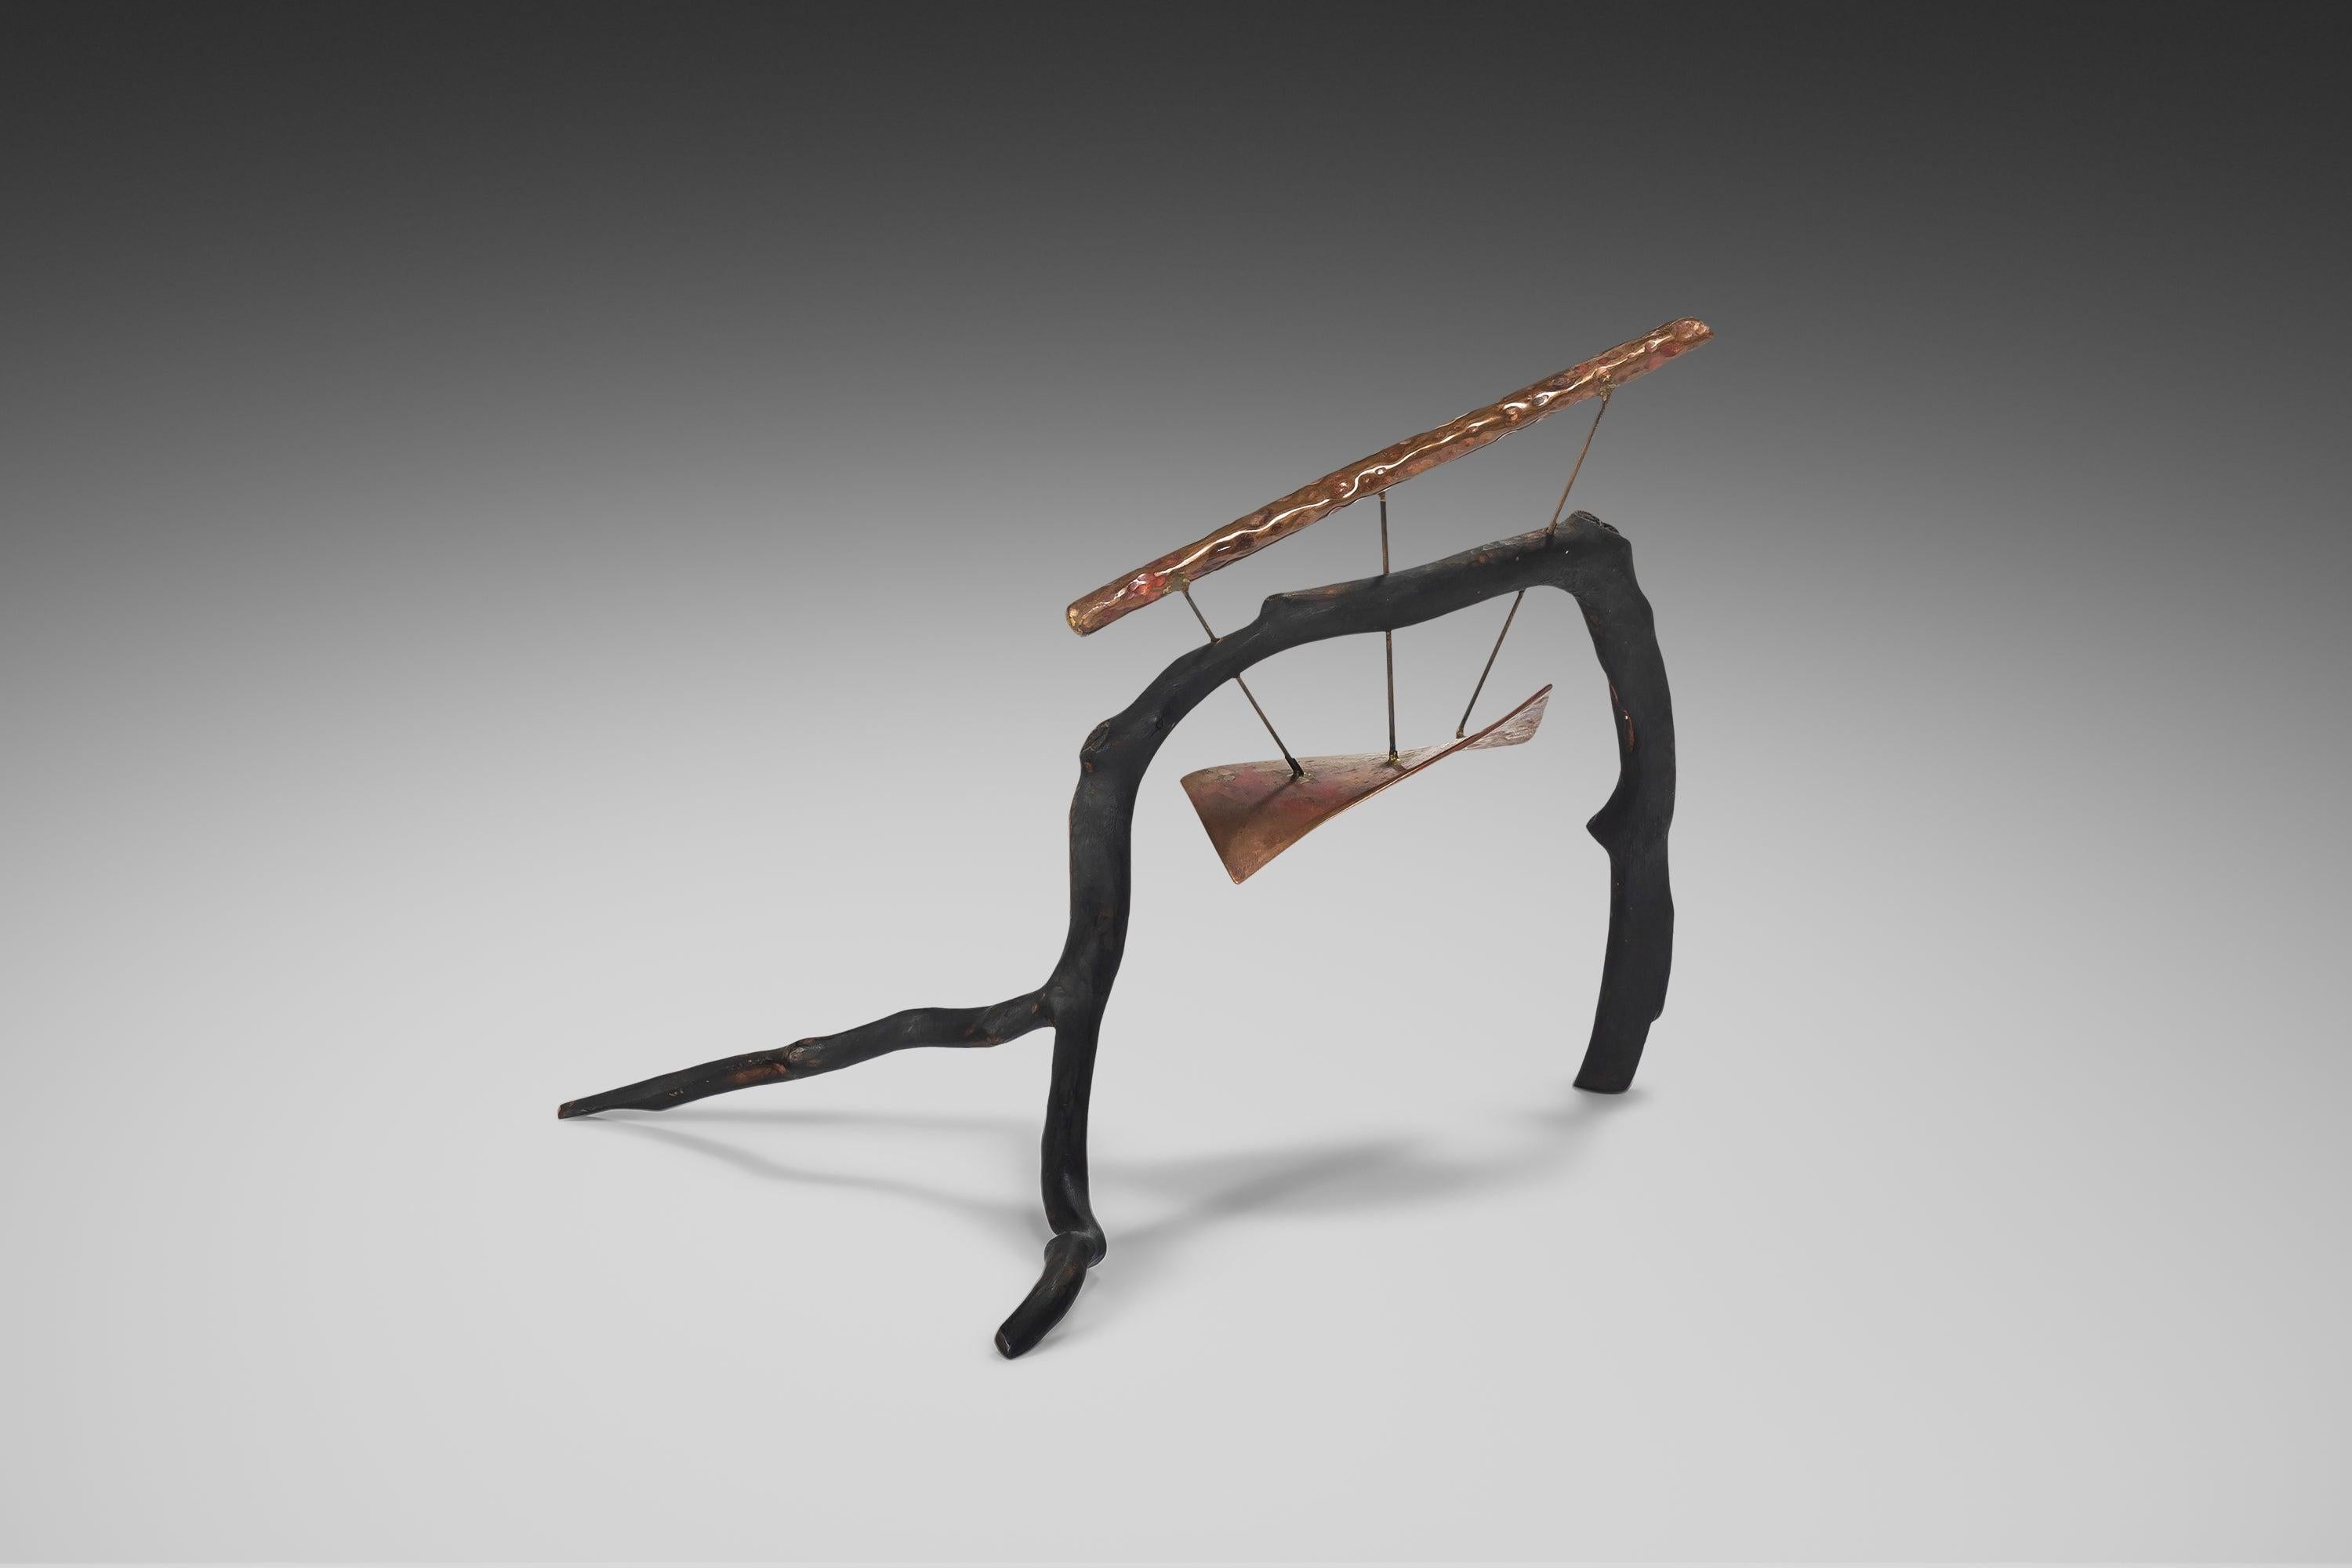 Modern Organic Sculptural Art Composed of Ebonized Wood and Patinaed Copper, c. 1960s For Sale